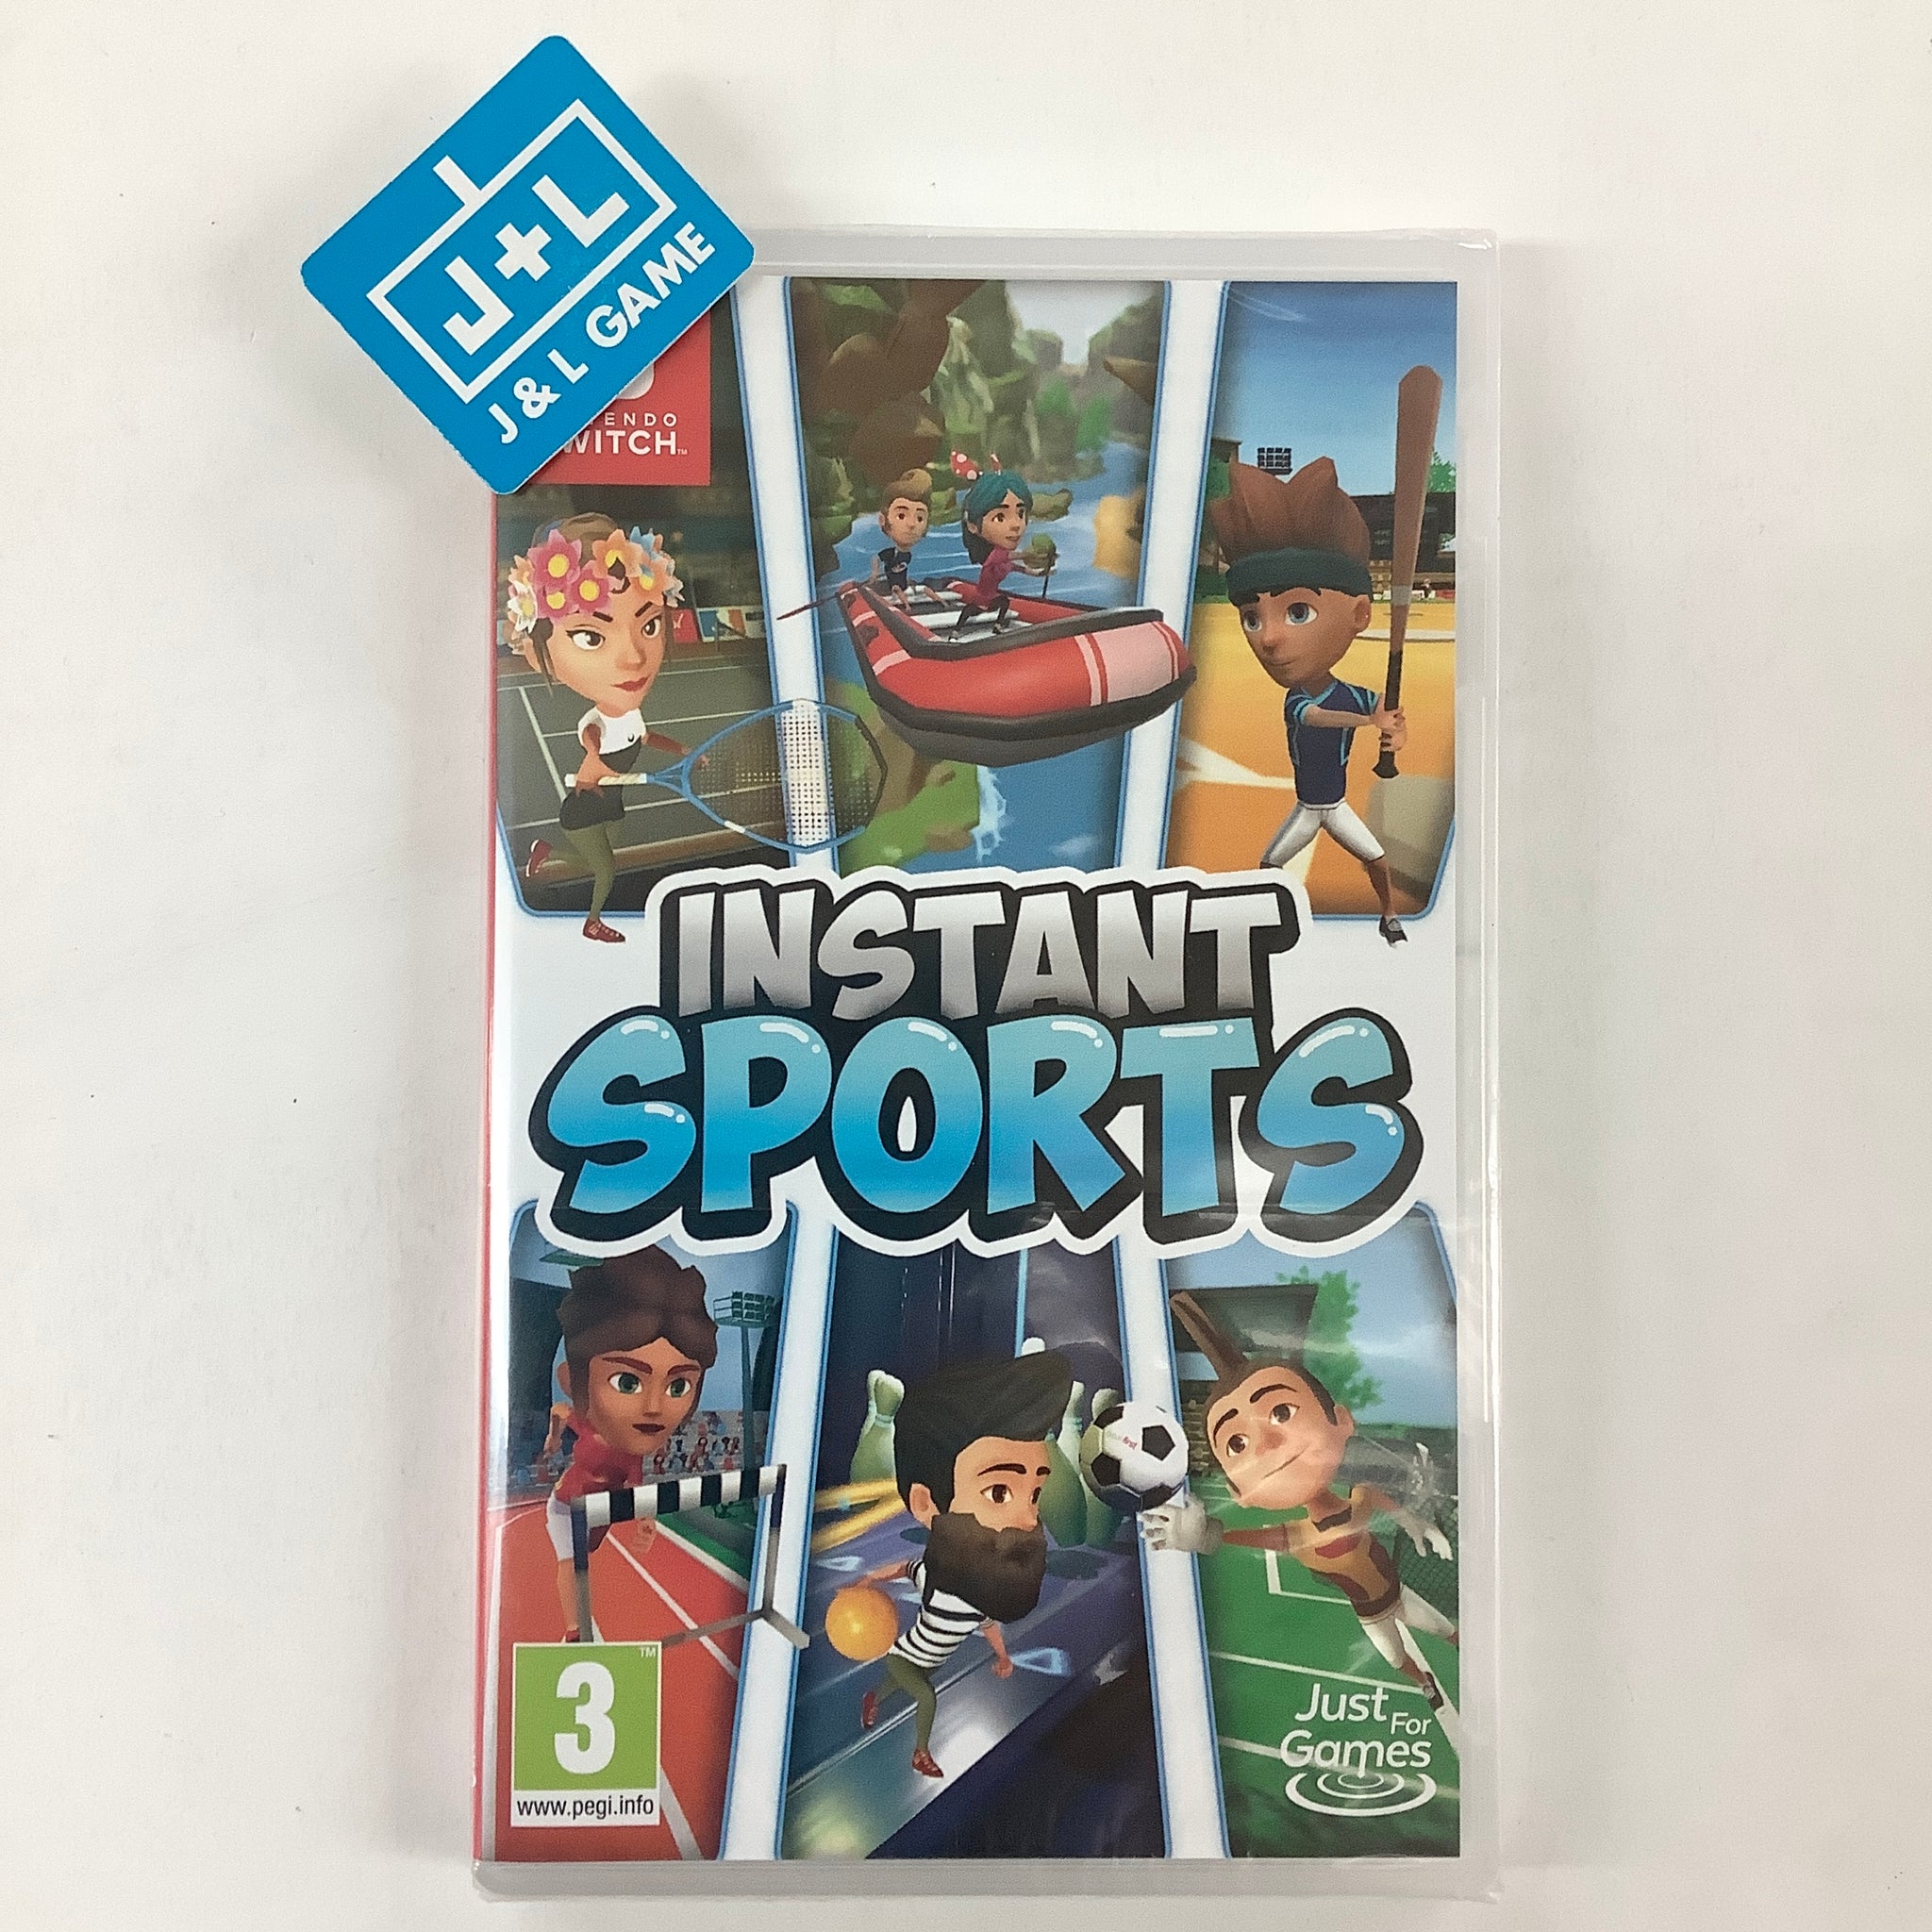 Instant Sports - (NSW) Nintendo Switch (European Import) Video Games Just For Games   